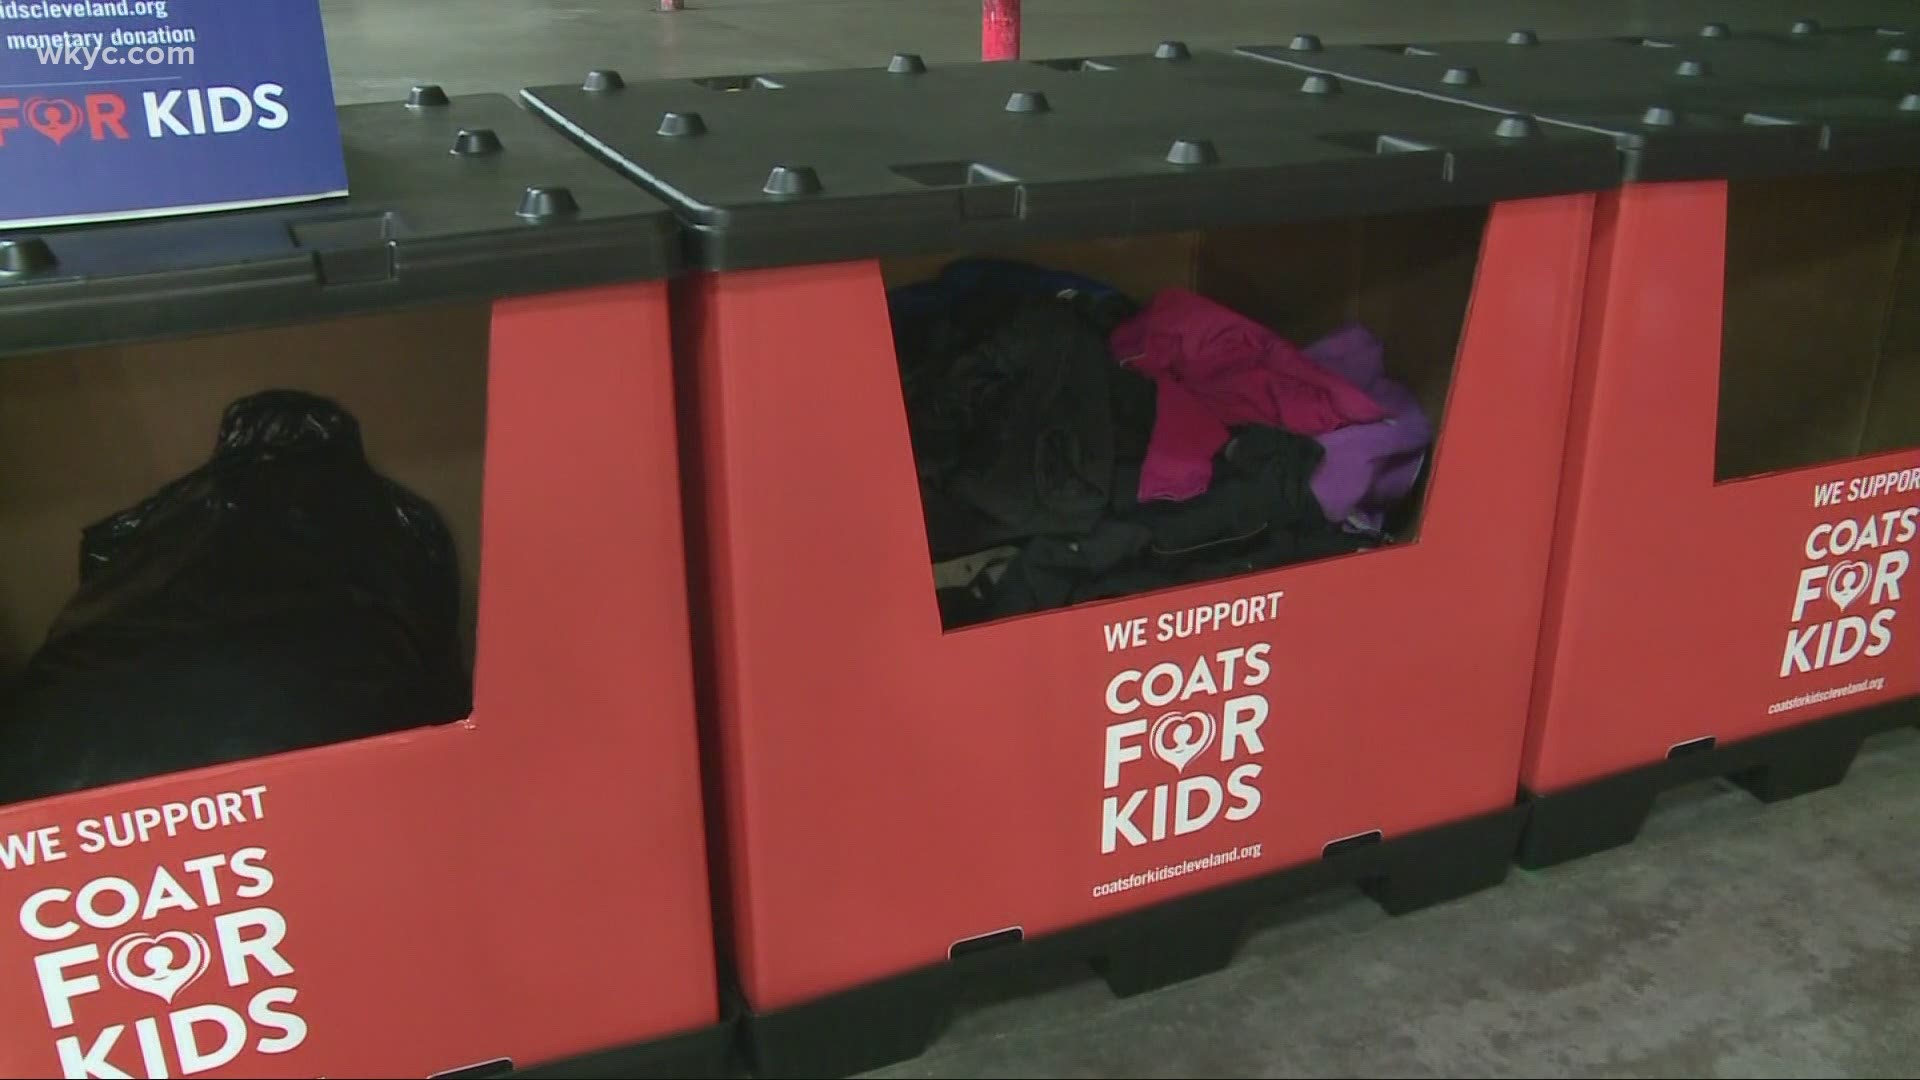 Just drop a new or gently used coat into a bin at area mall or at participating businesses.  There is a complete list at WKYC.com.